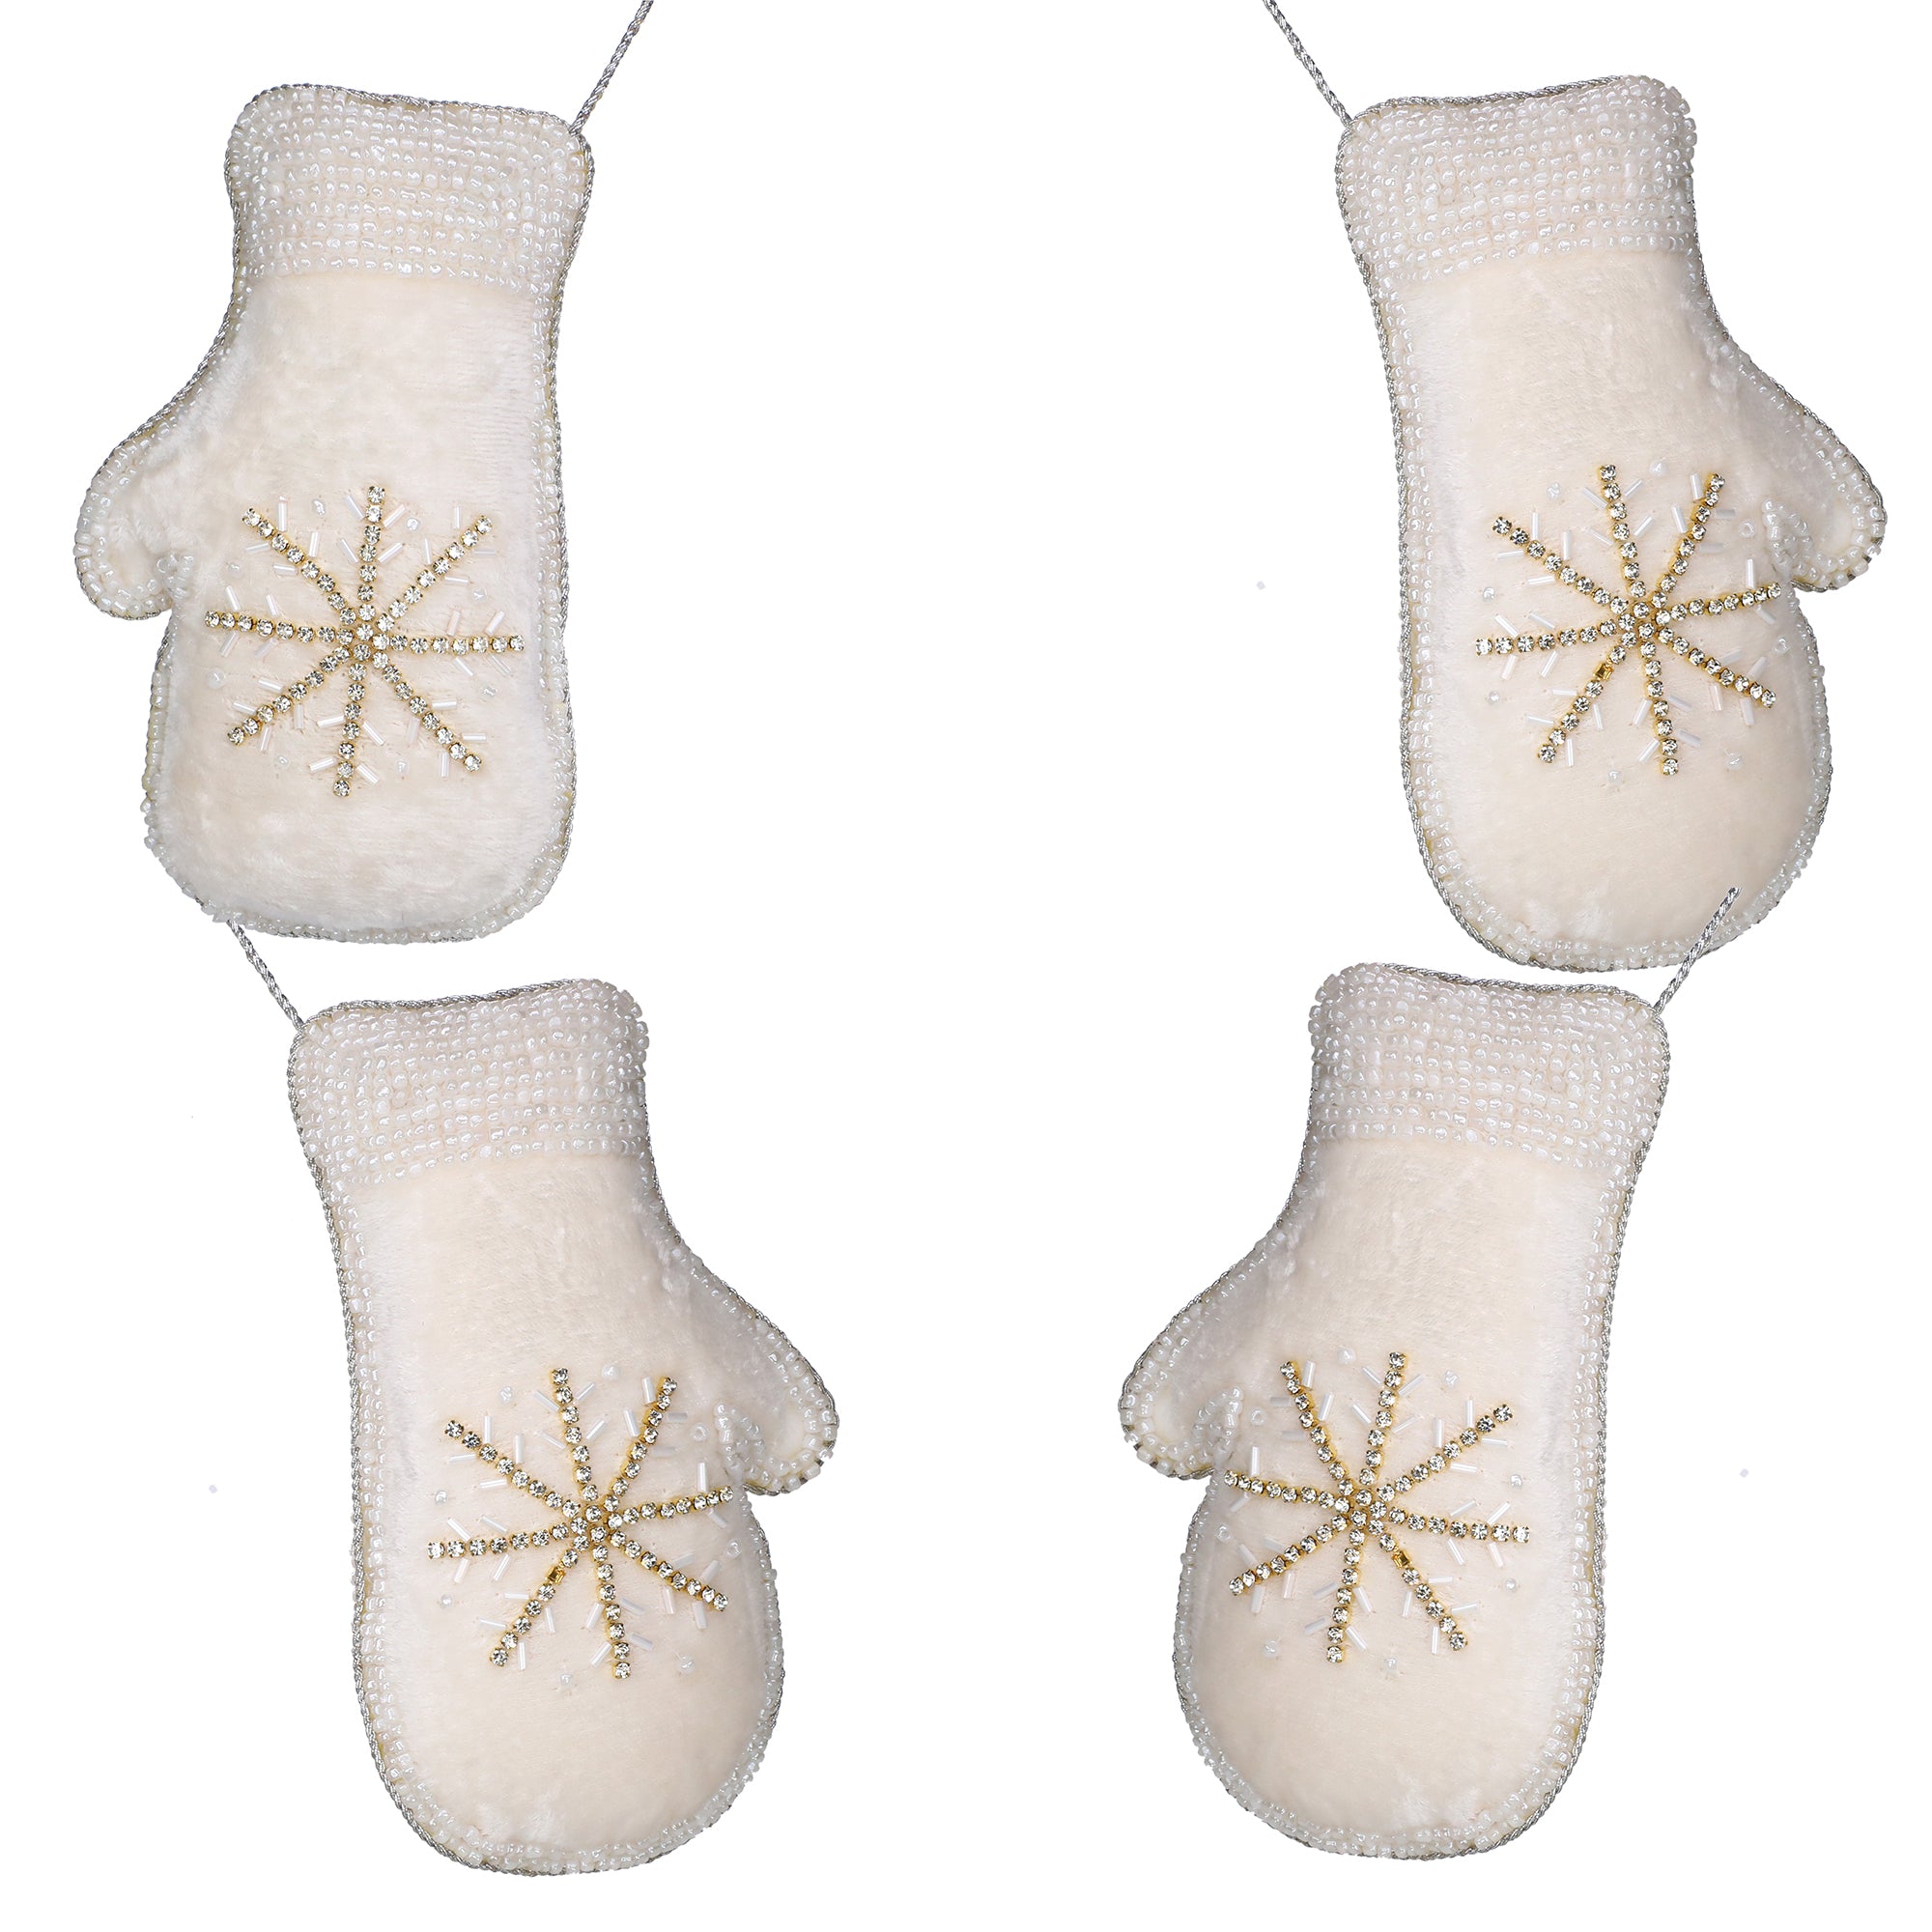 Sugar & Spice Bead Embroidered Plush Hangings / White, Gold / 6.5"x4" / Set of 2 - trunkin.in